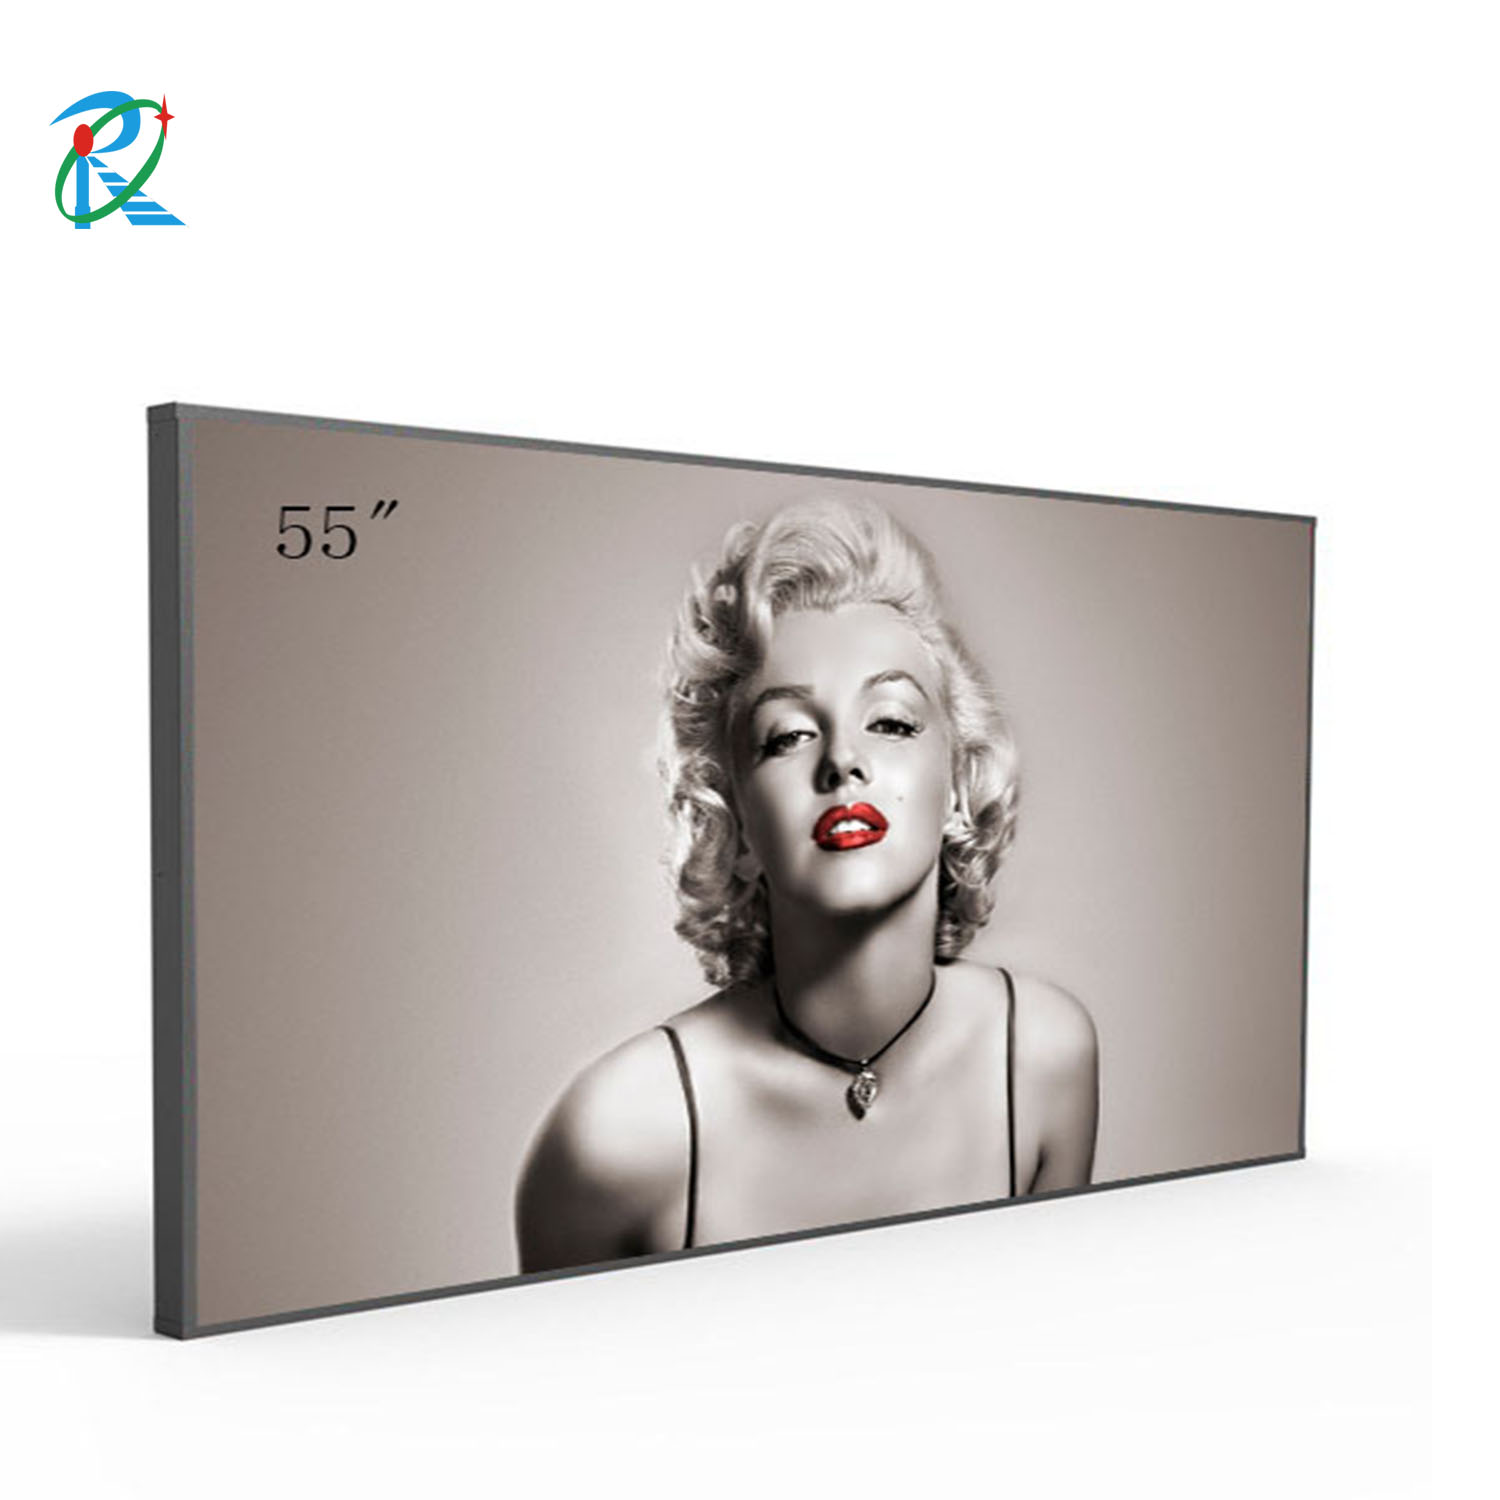 55 inch outdoor high birghtess TFT LCD monitor